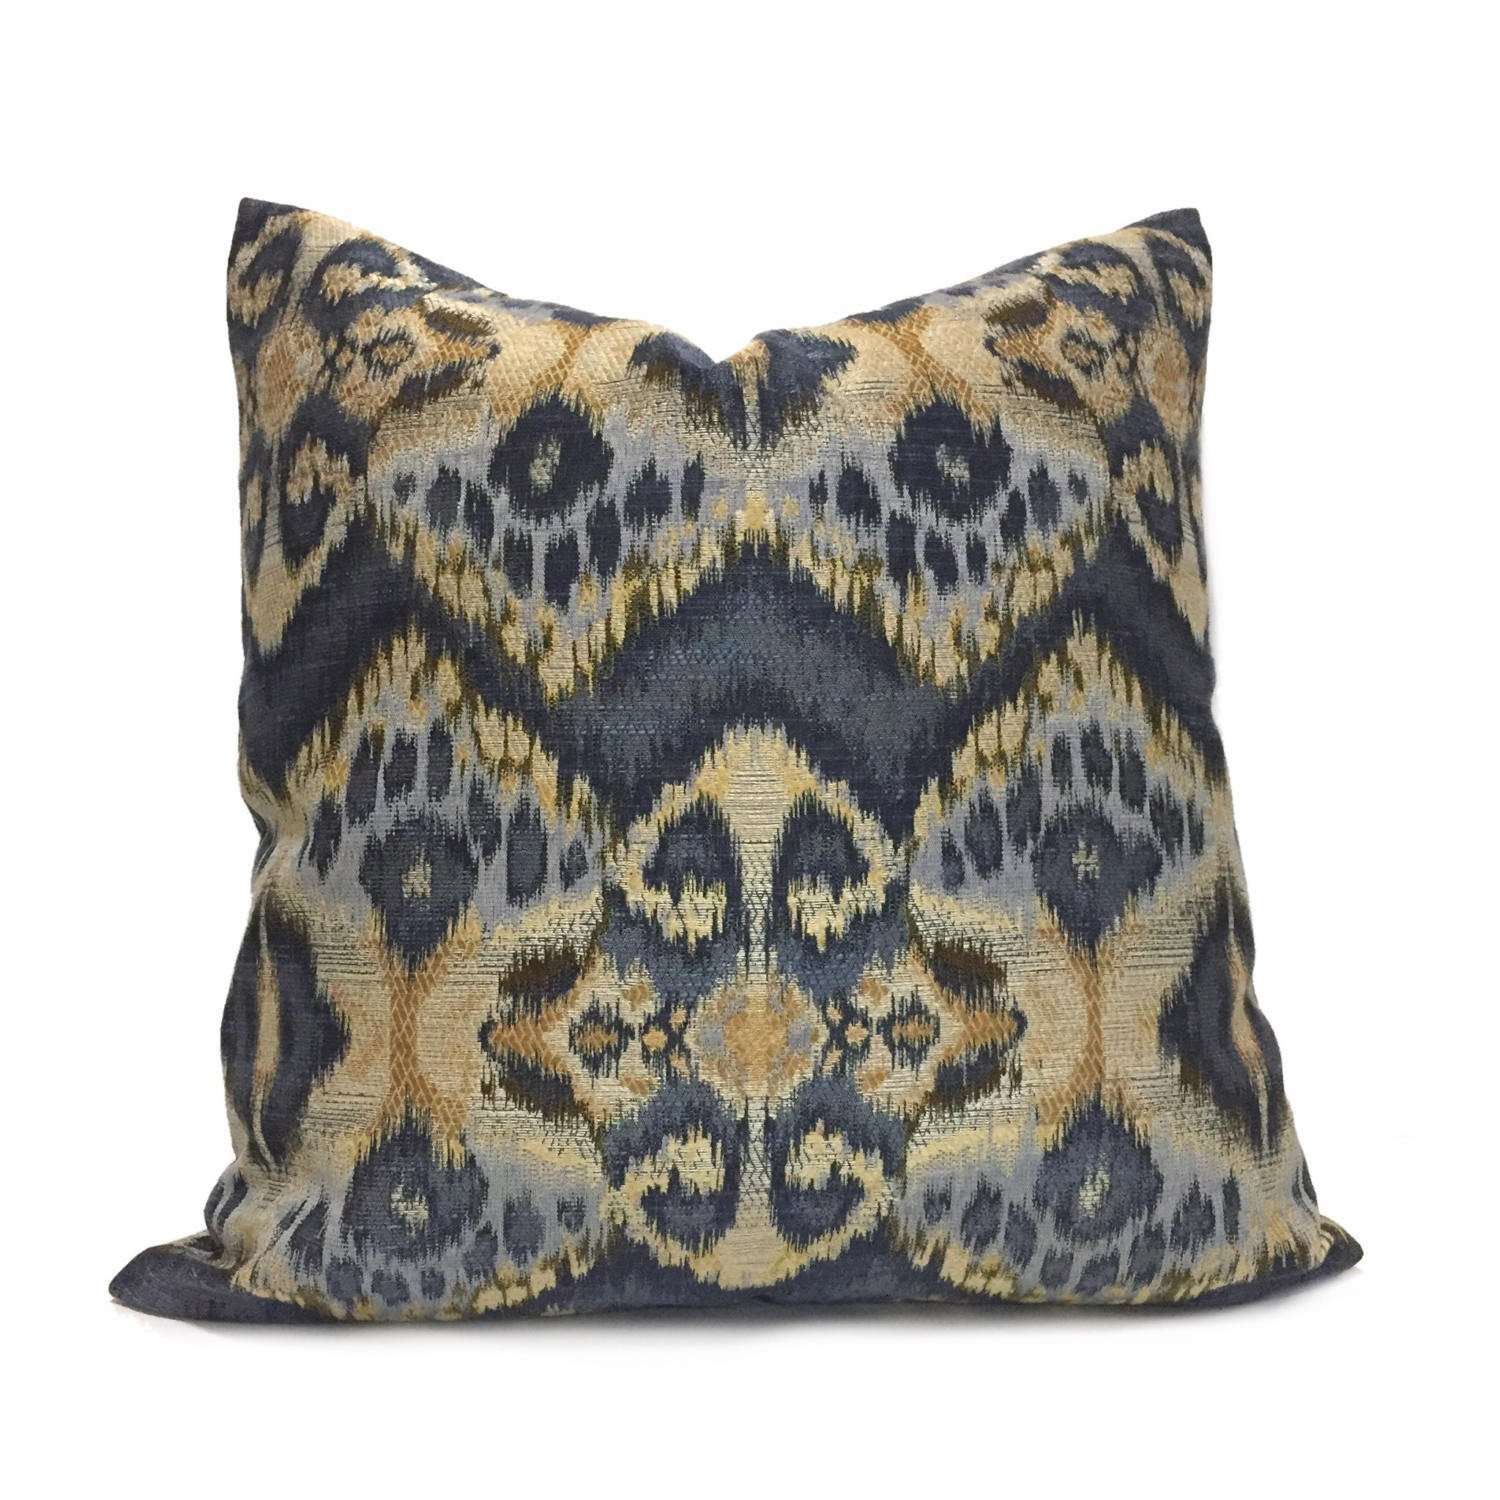 Robert Allen Rhythm Waves Blue Ikat Tribal Ethnic Pattern Pillow Cover by Aloriam